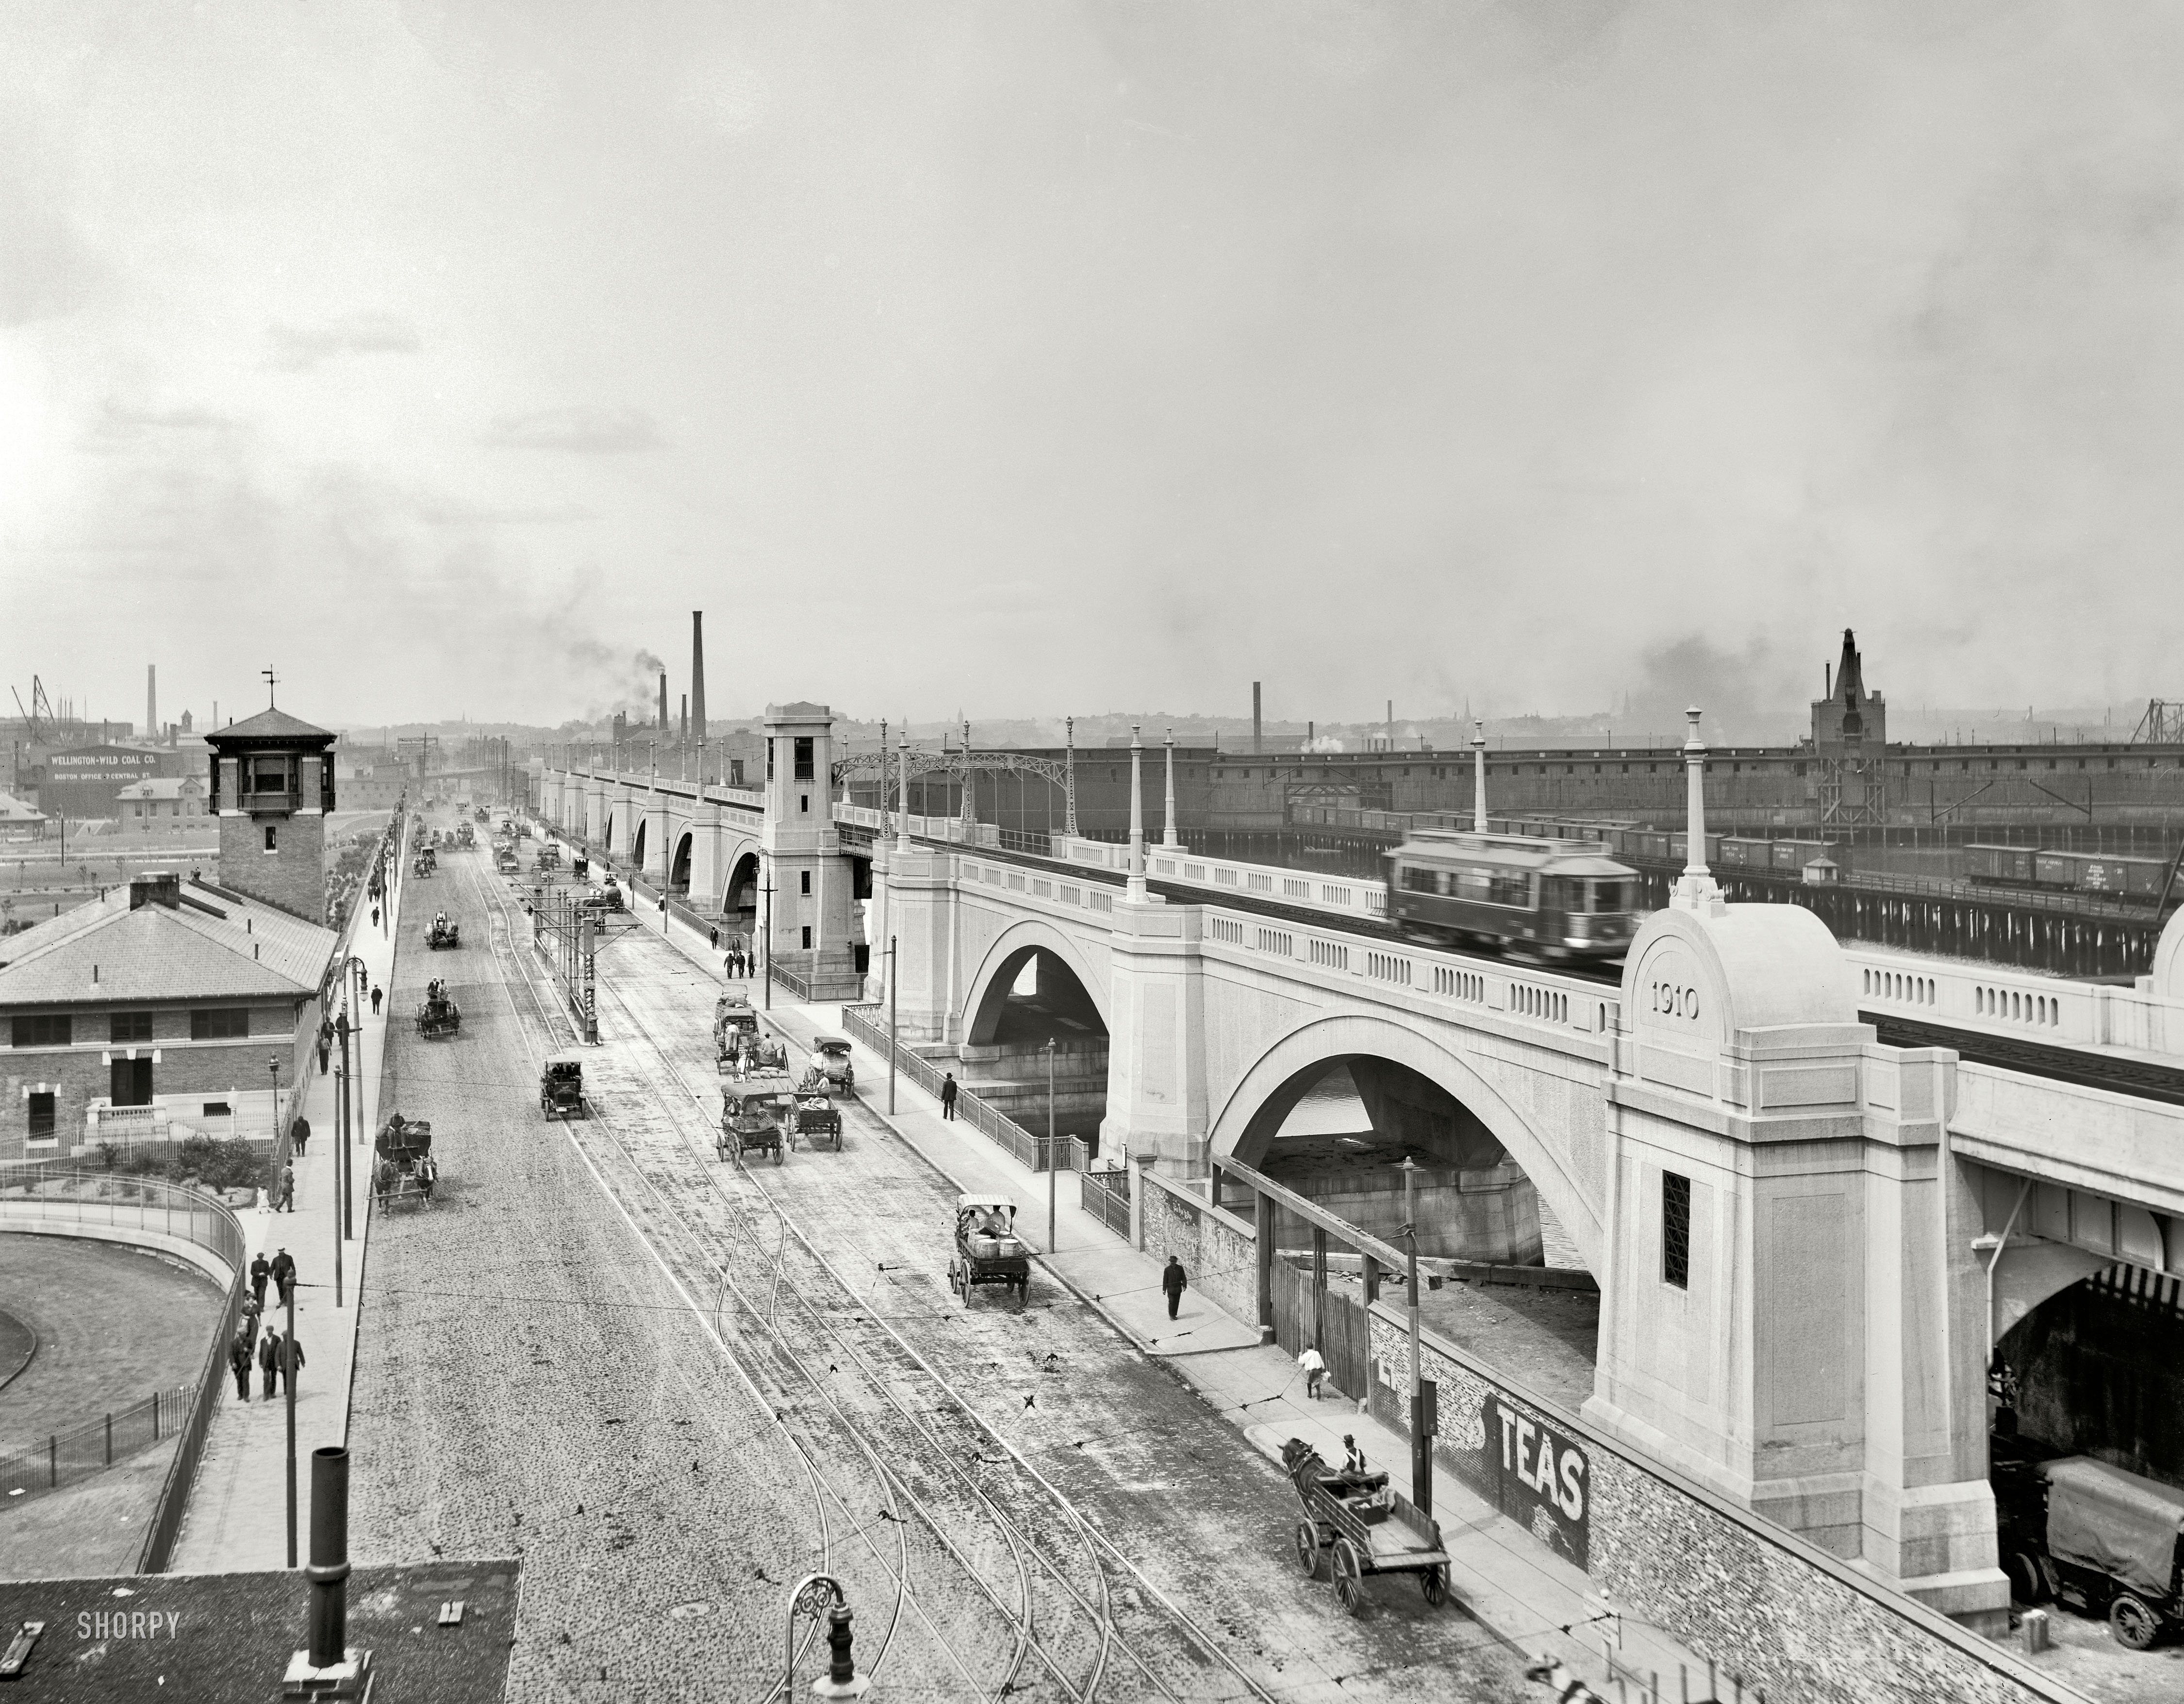 Boston circa 1912. "East Cambridge Bridge." A visual compendium of ways to get from here to there. 8x10 glass negative, Detroit Publishing Co. View full size.